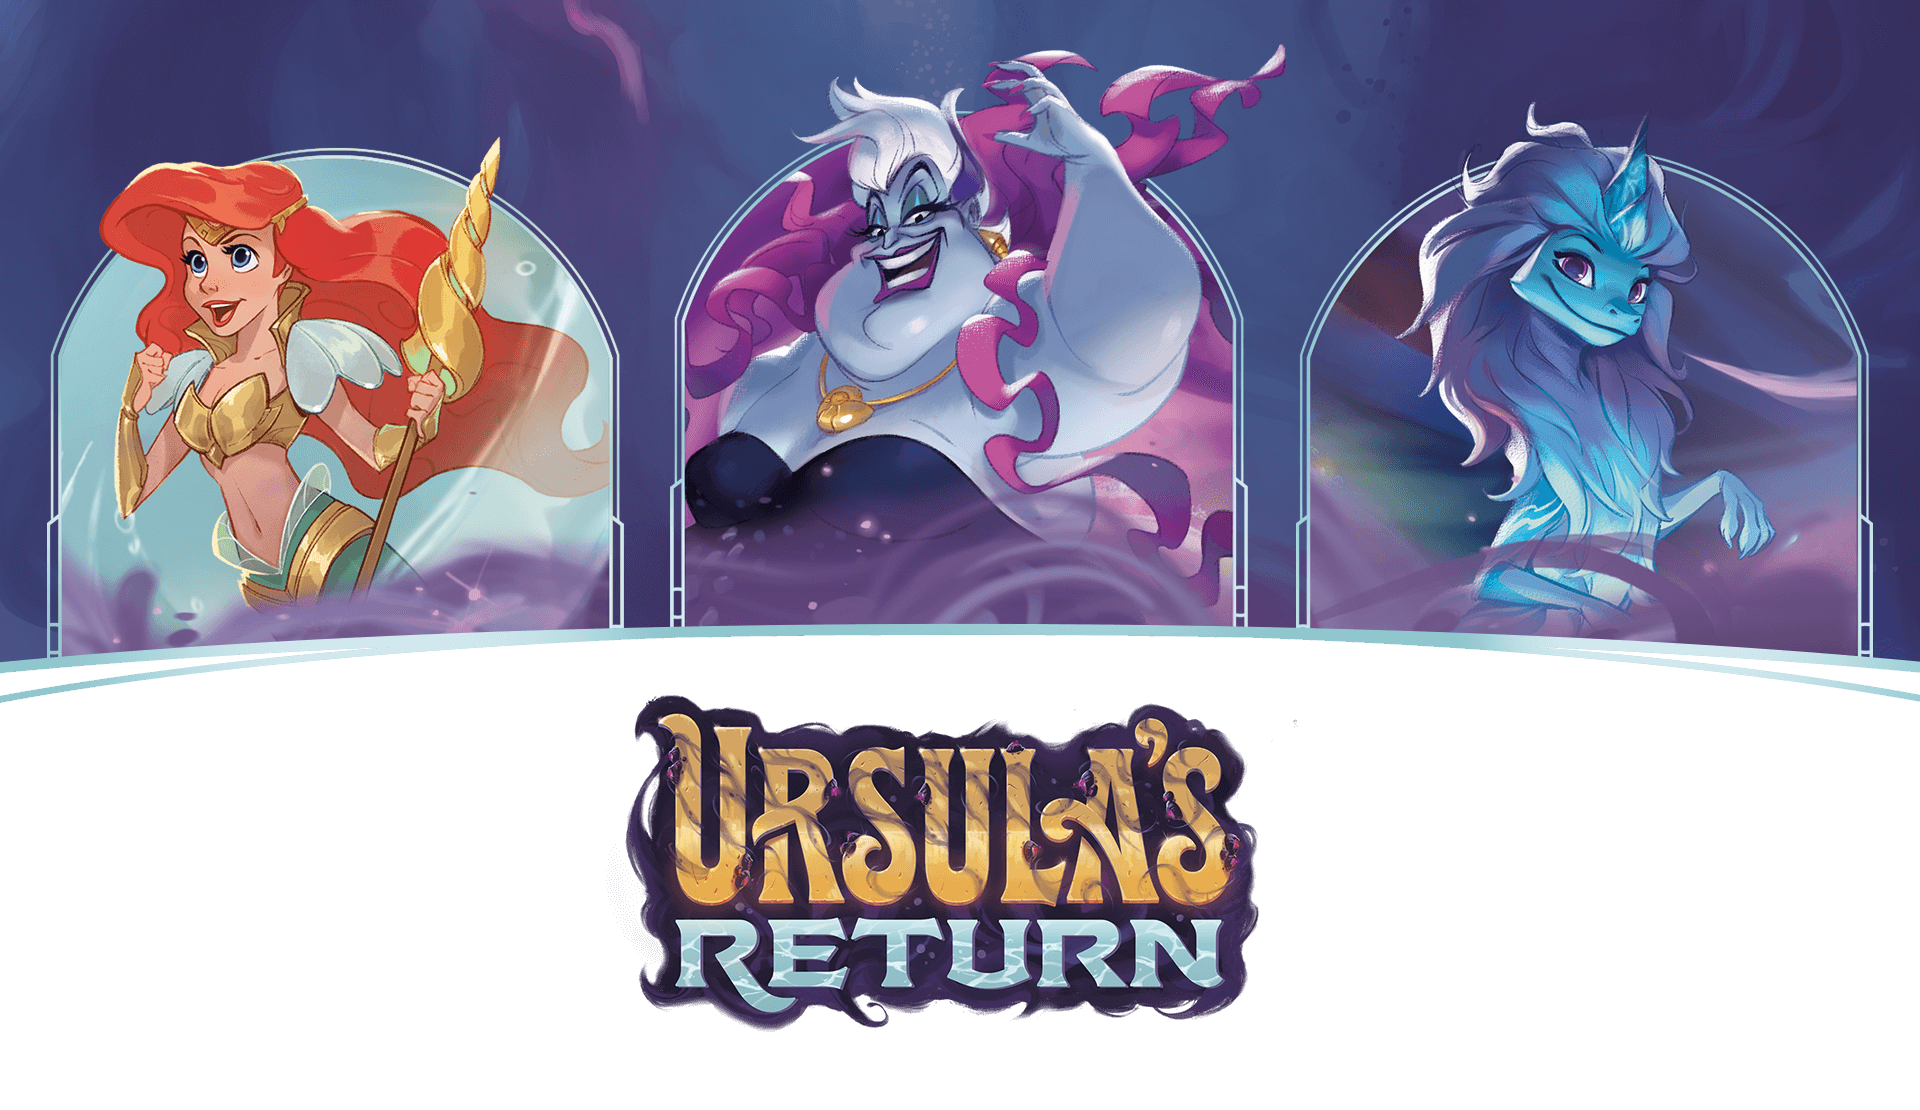 Decorative header image showing three characters and a logo that says Ursula's Return